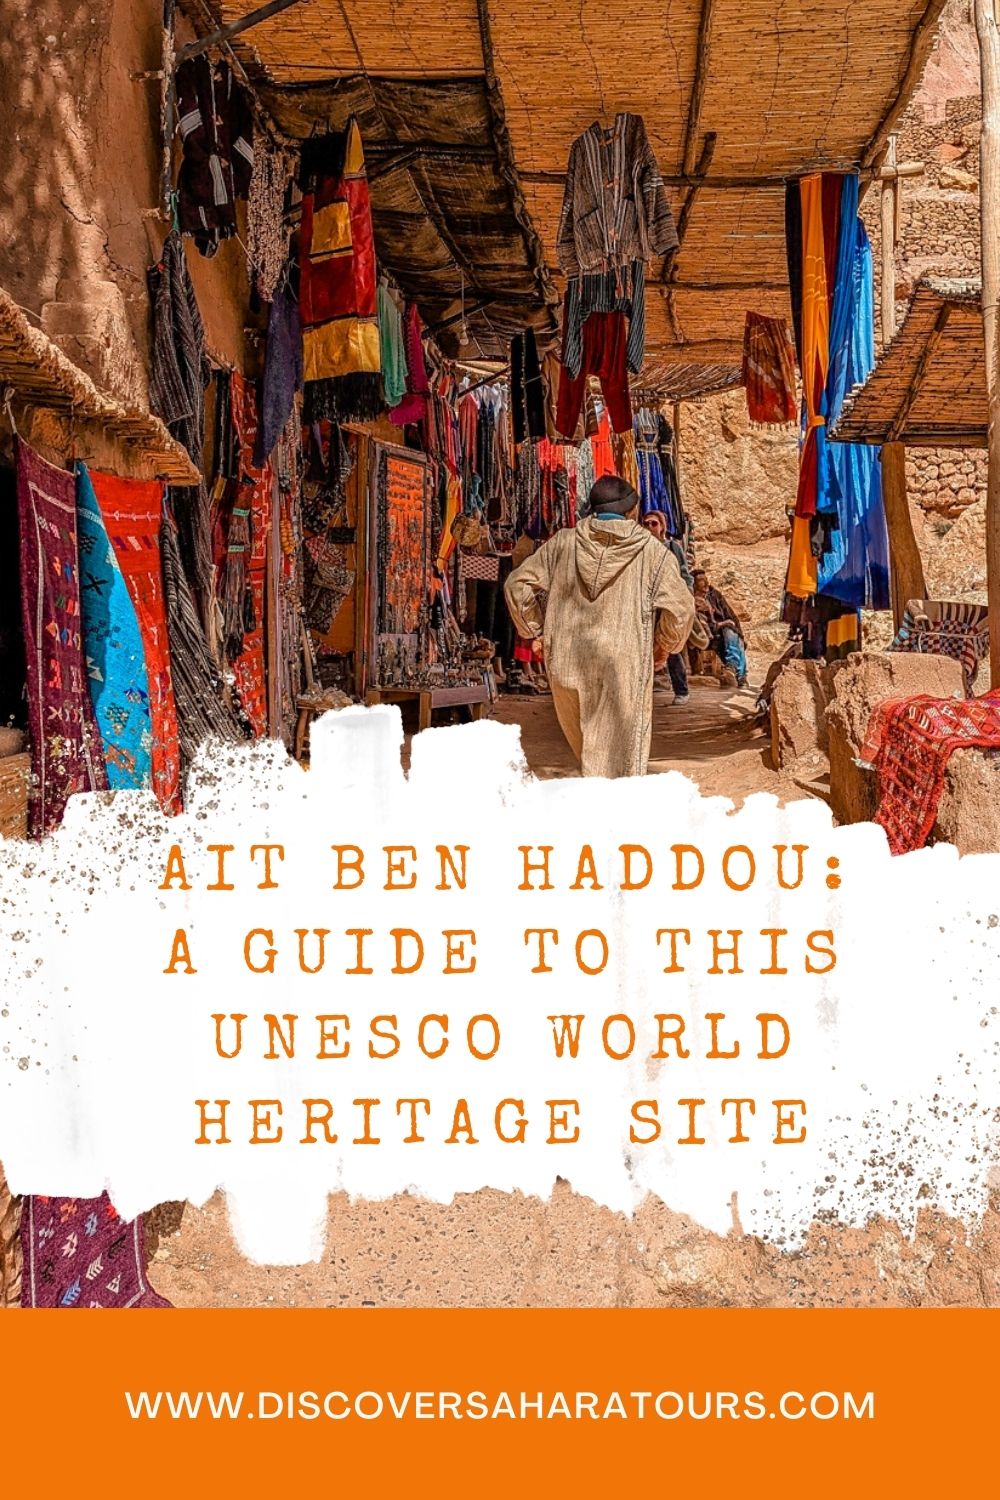 Featured image for “Ait Ben Haddou: A Historic City at the Crossroads of Trade”